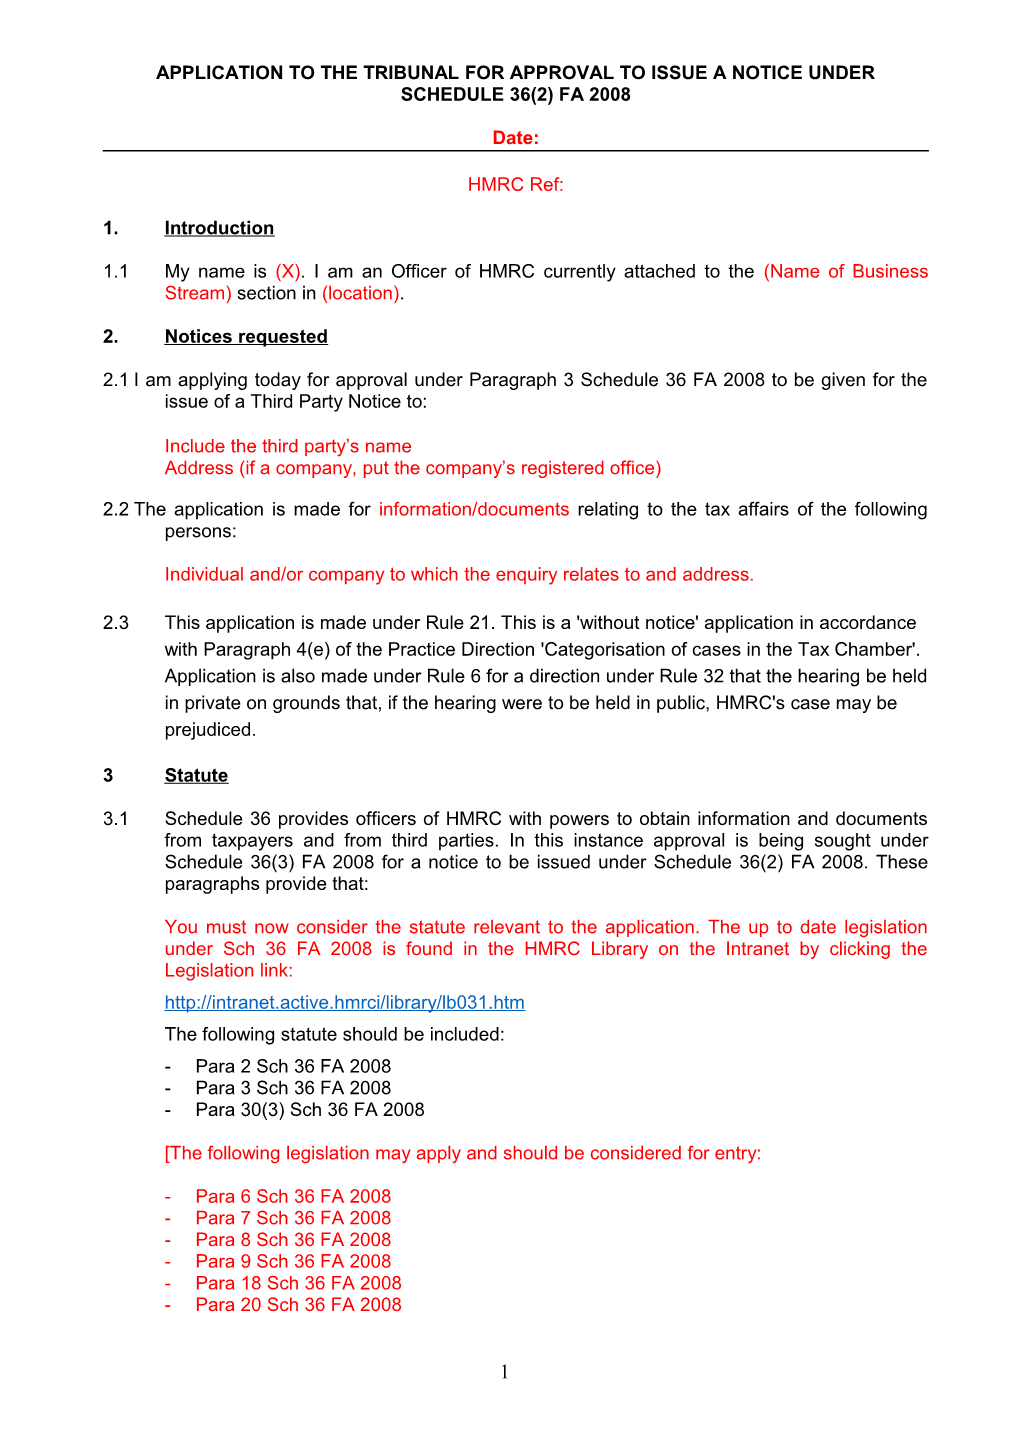 Application to the Tribunal for Approval to Issue a Notice Under Schedule 36(2) Fa 2008